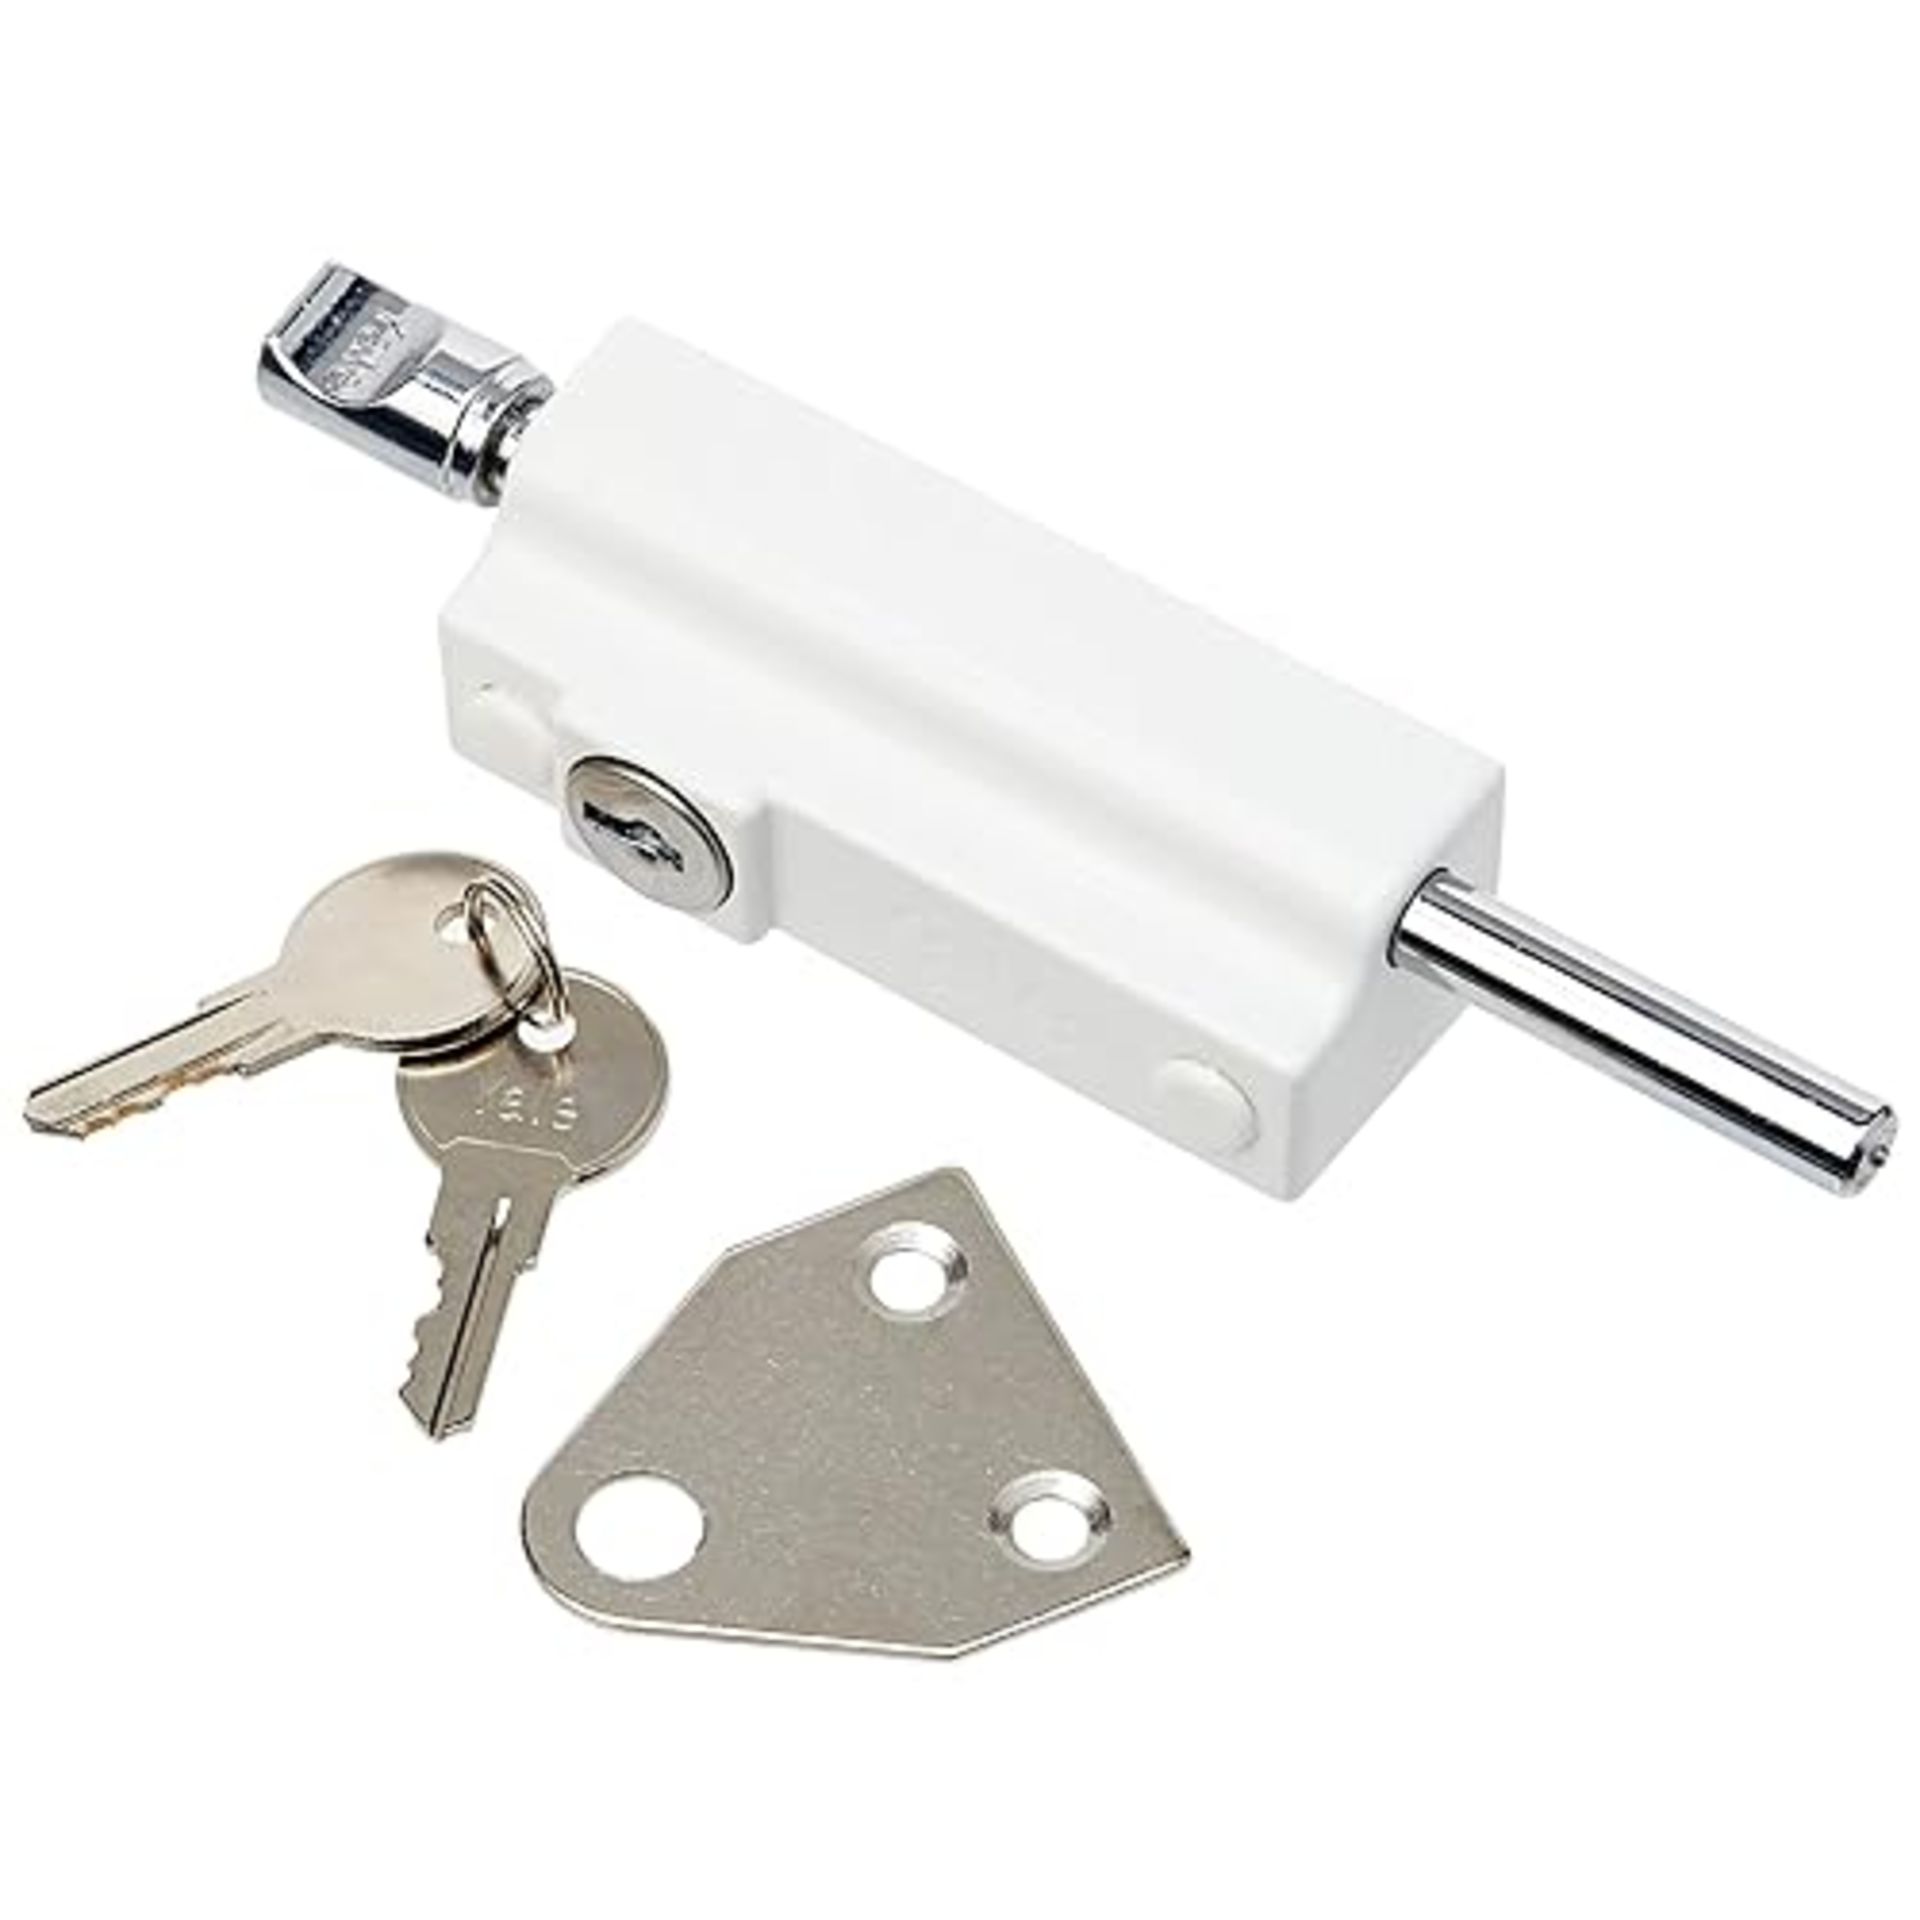 Yale P-124-WE Door Pushbolt, White Finish, Standard Security, Visi Packed, suitable for aluminium d